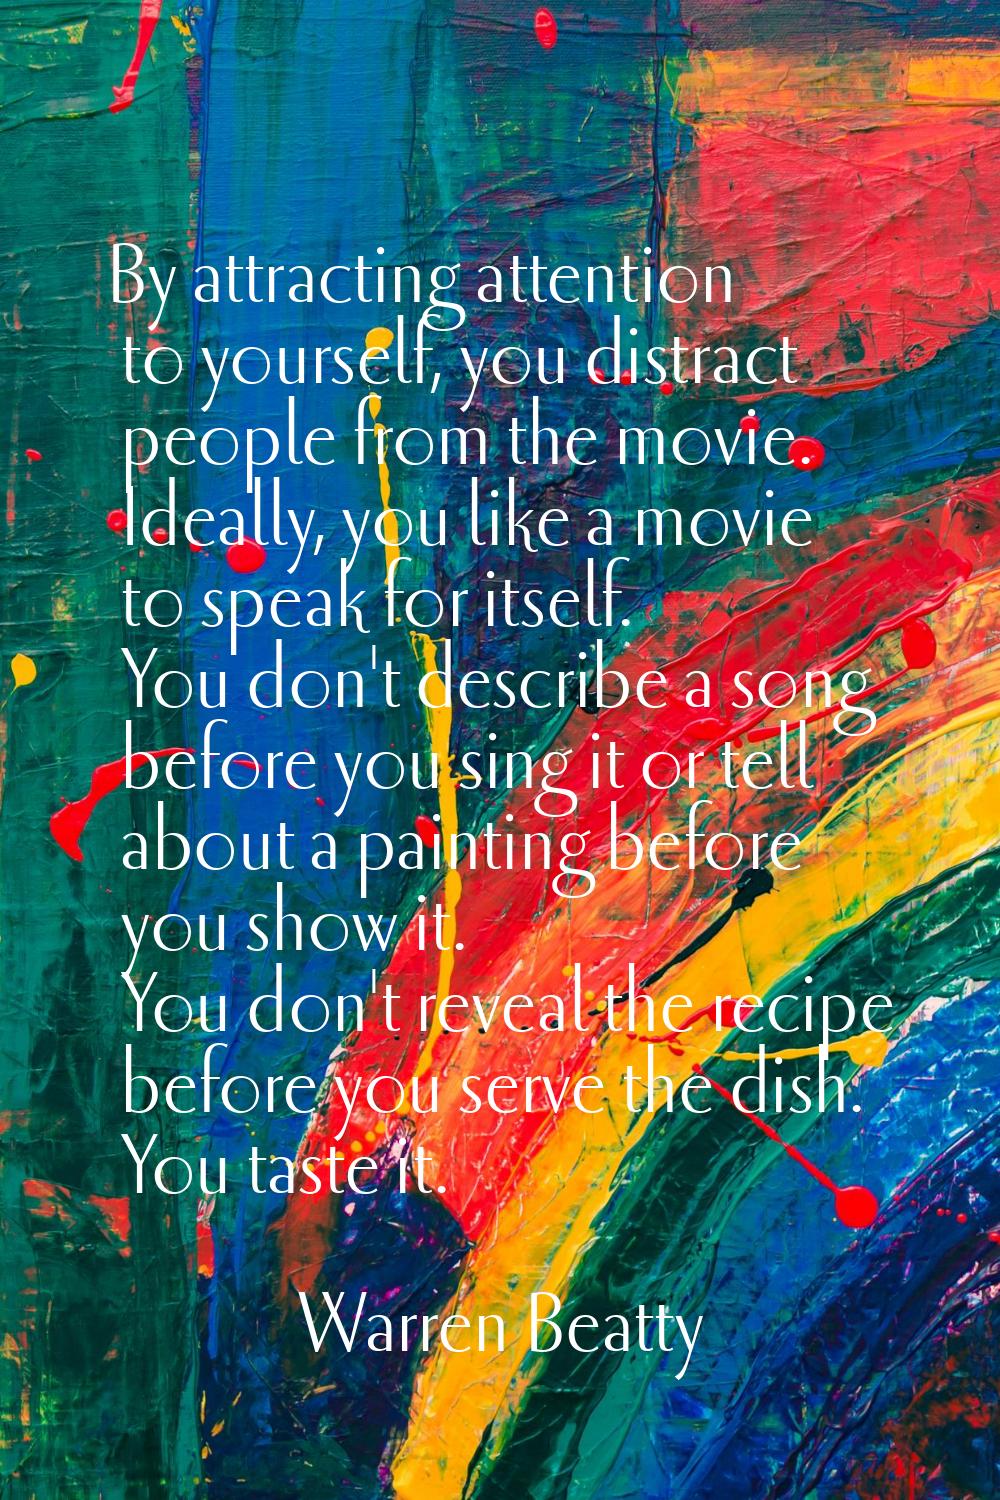 By attracting attention to yourself, you distract people from the movie. Ideally, you like a movie 